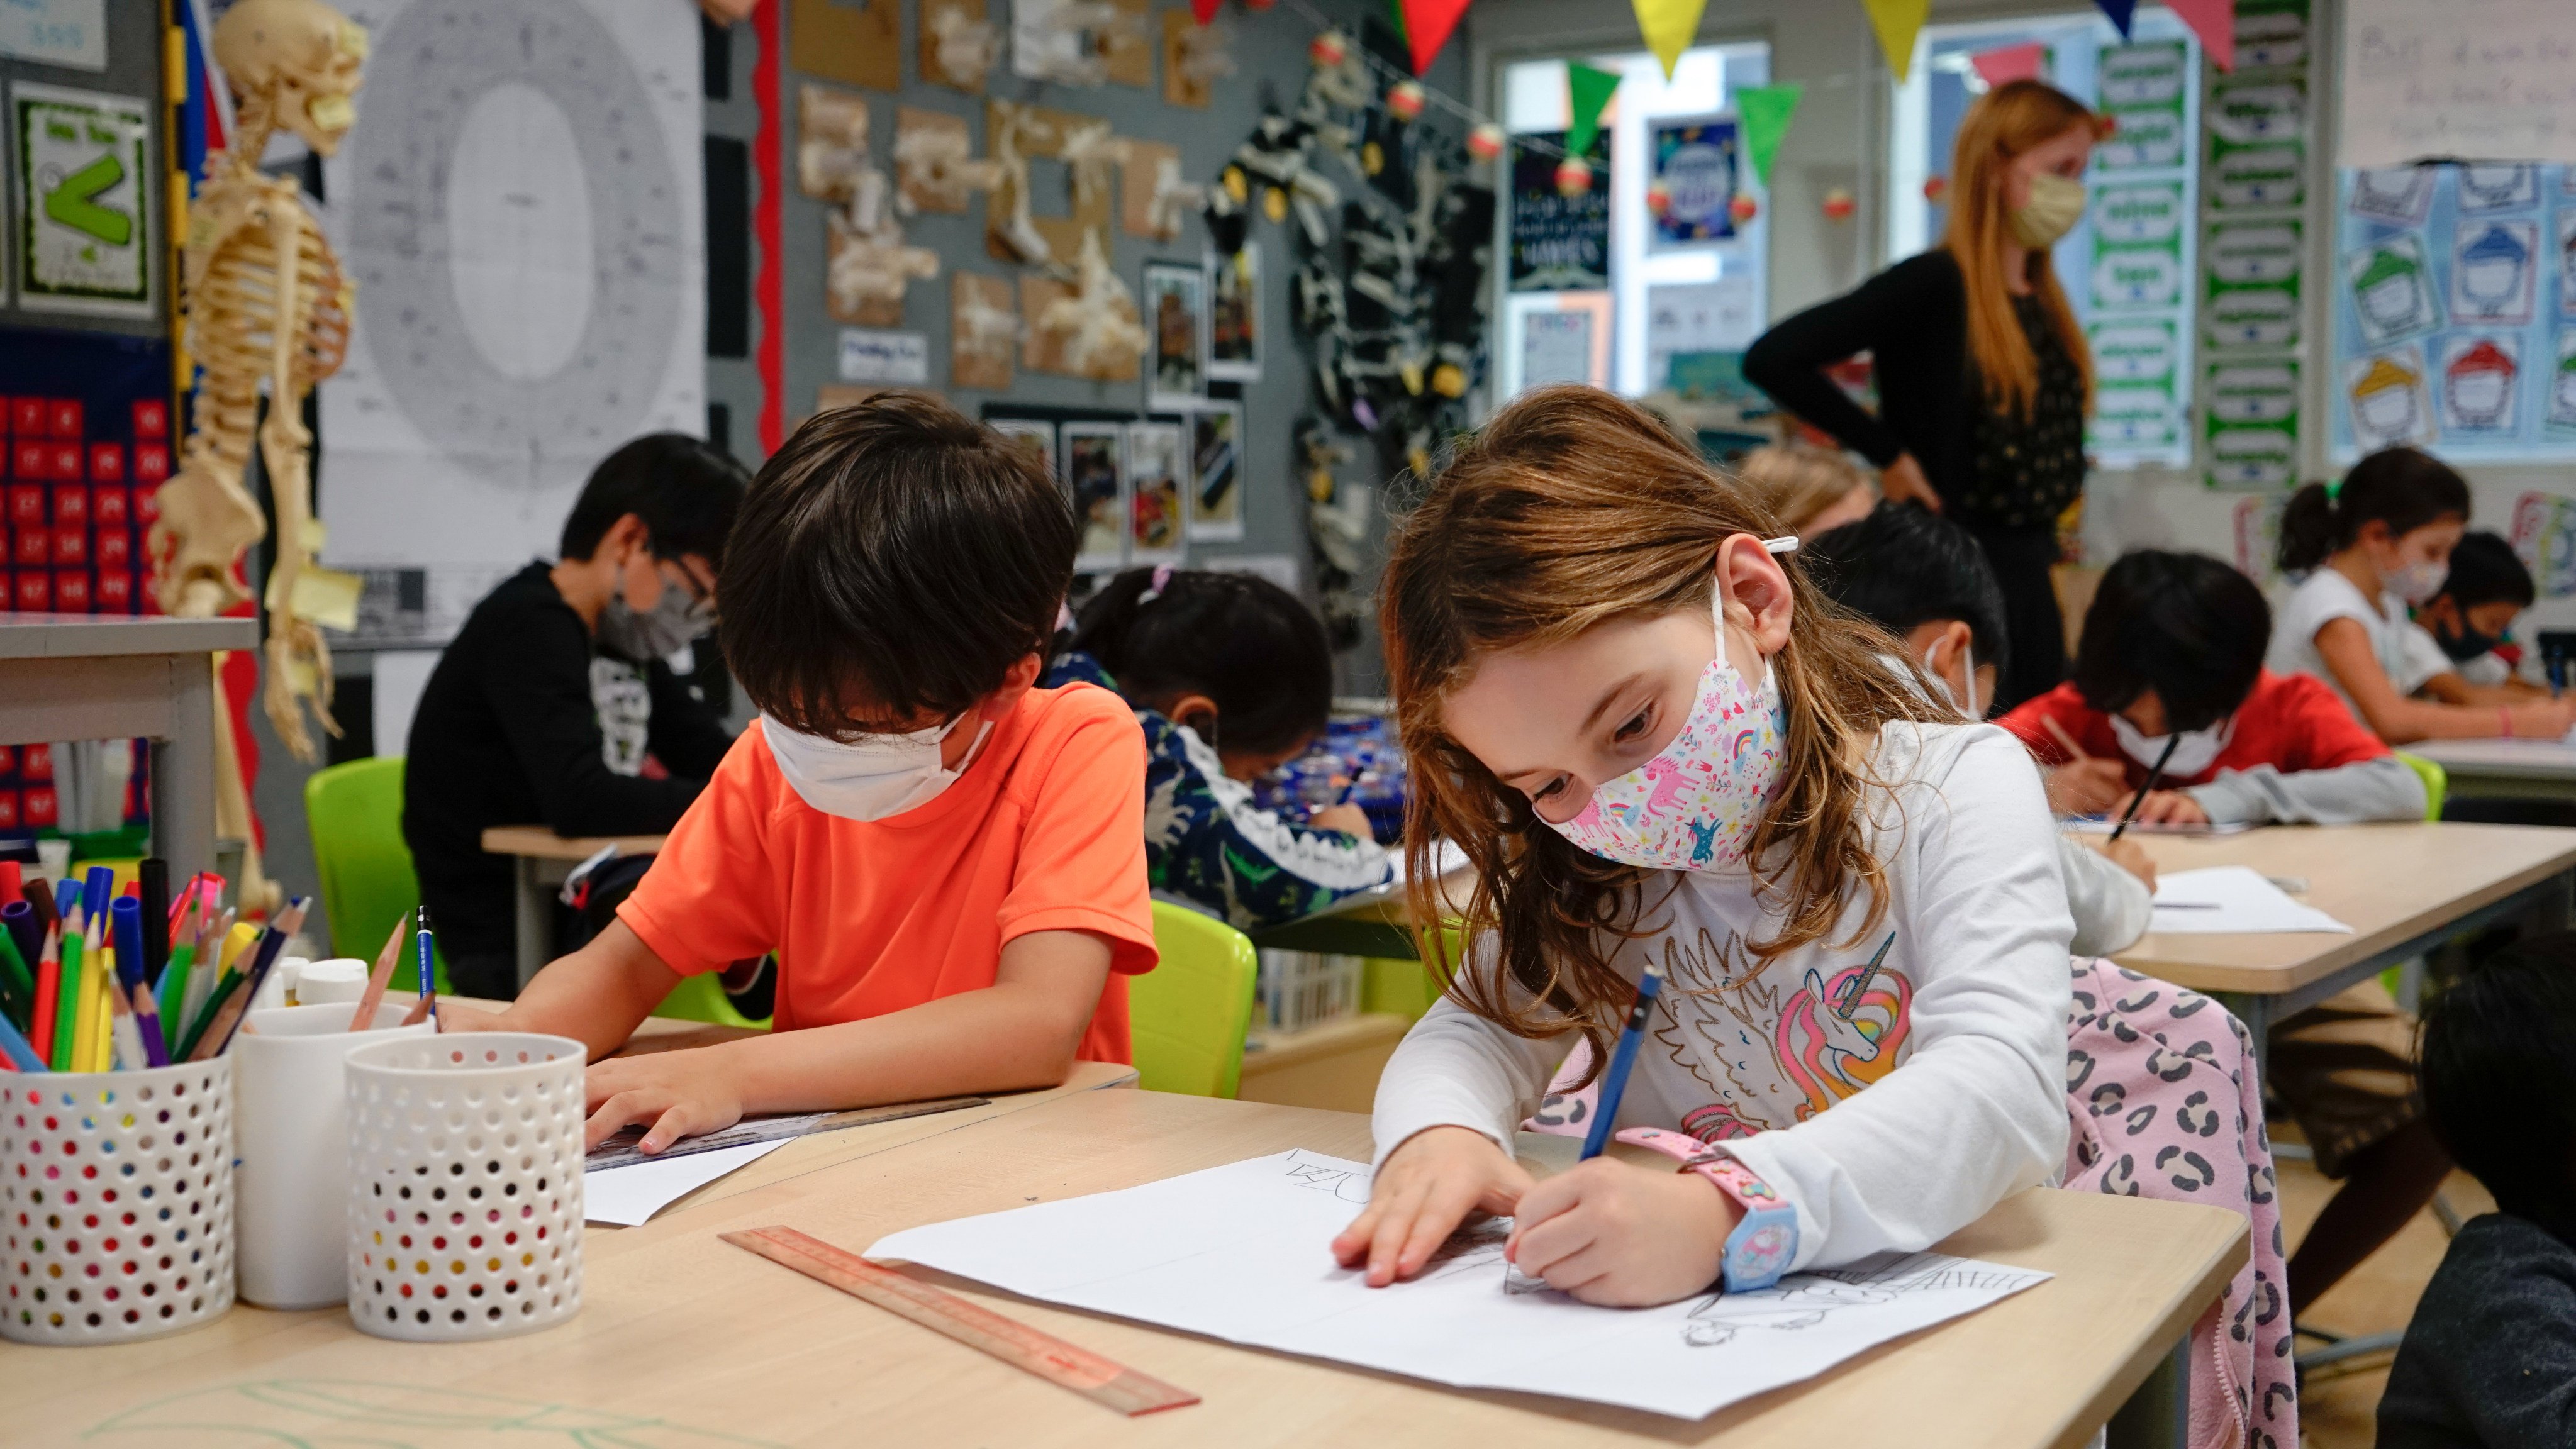 Giving form to impressions and emotions at a German Swiss International School art class. Photo: Handout